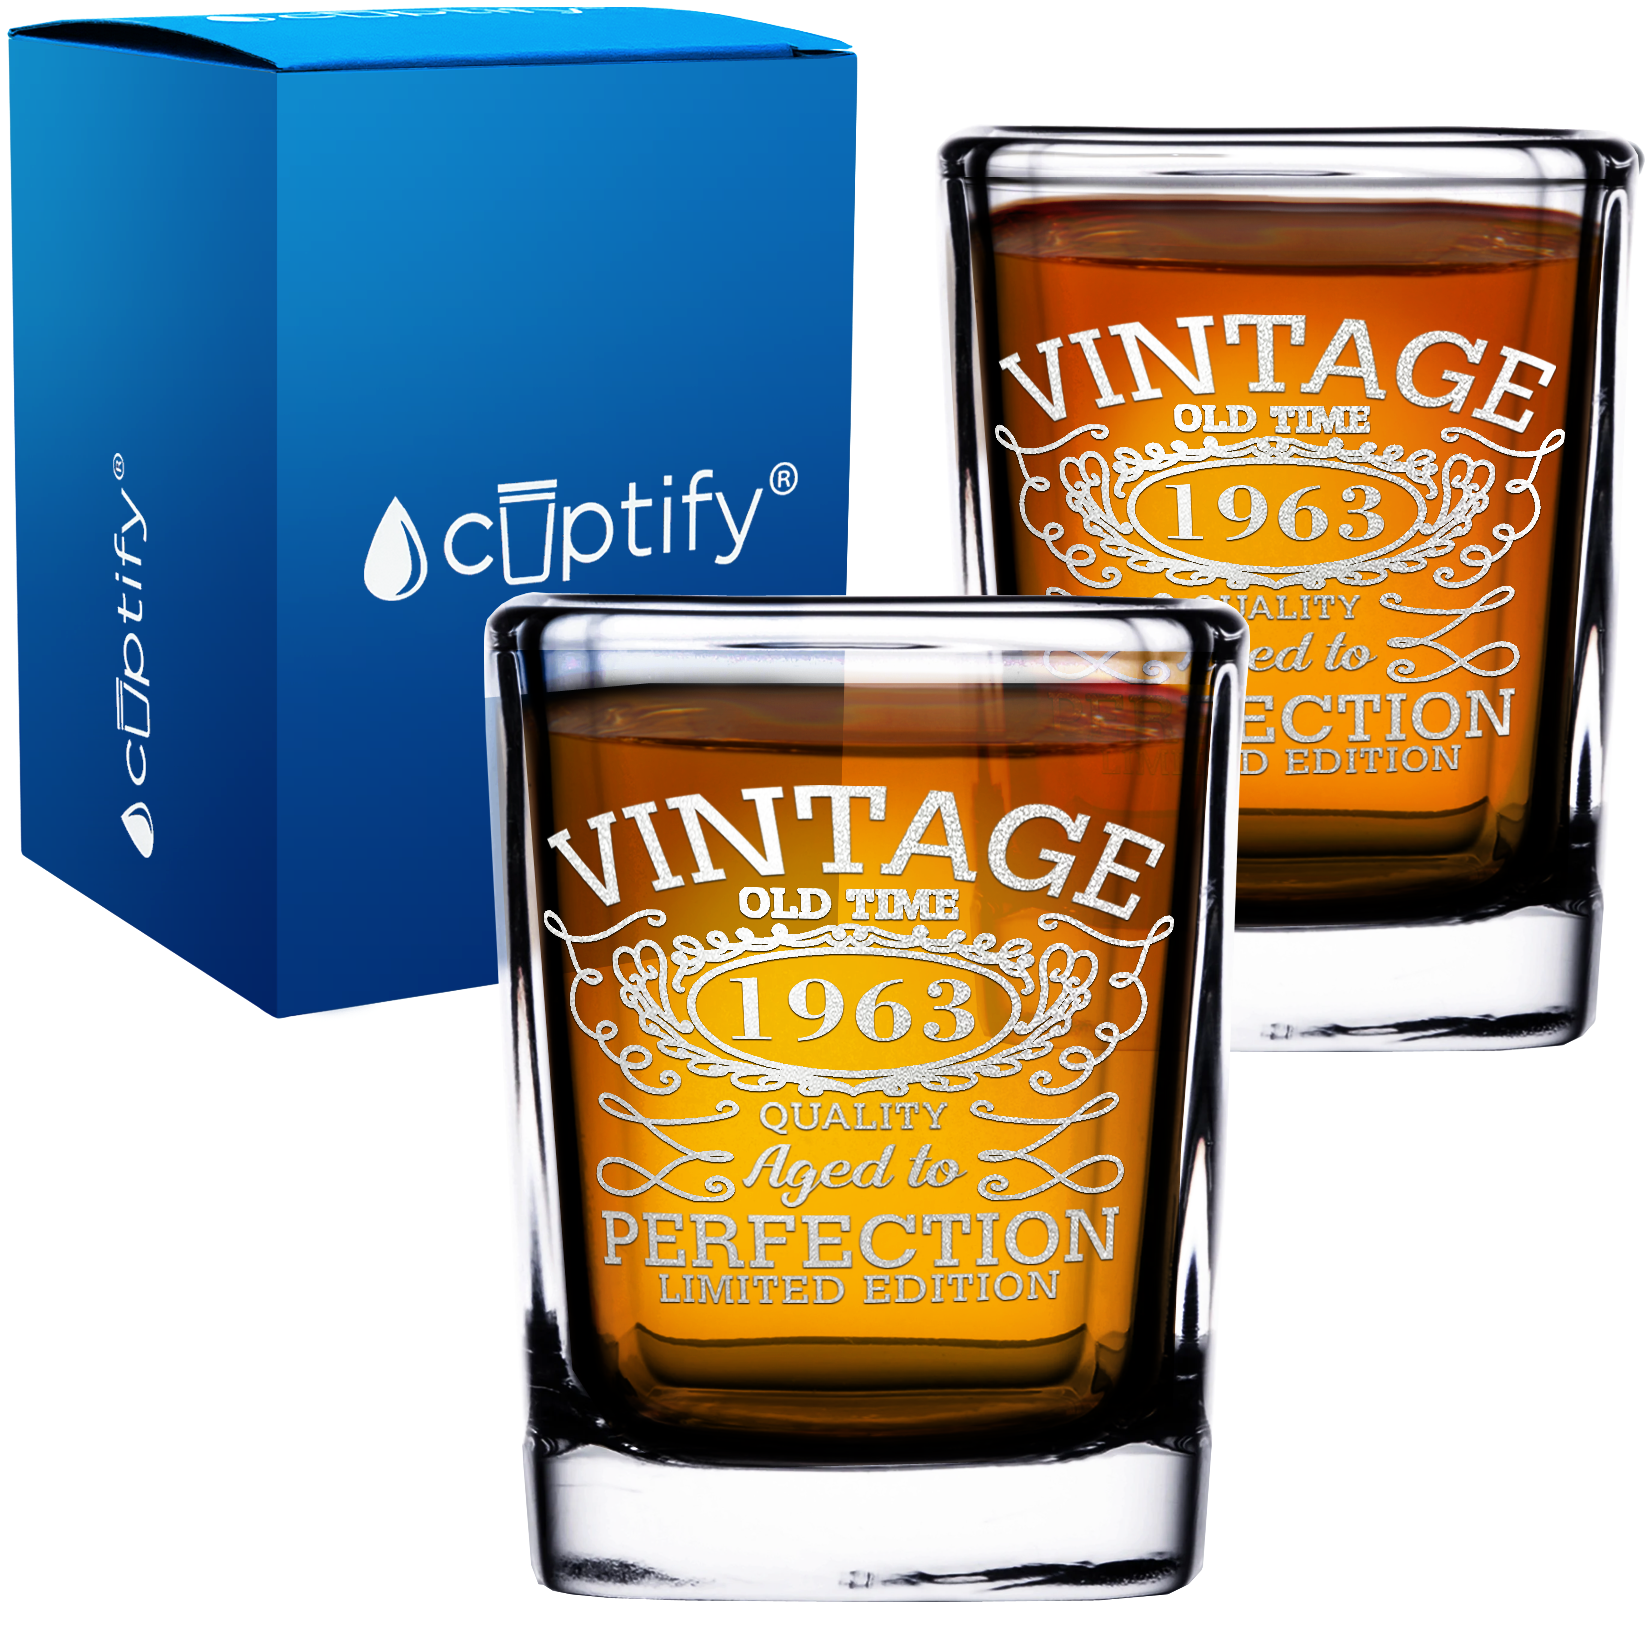 59th Birthday Vintage 59 Years Old Time 1963 Quality 2oz Square Shot Glasses - Set of 2